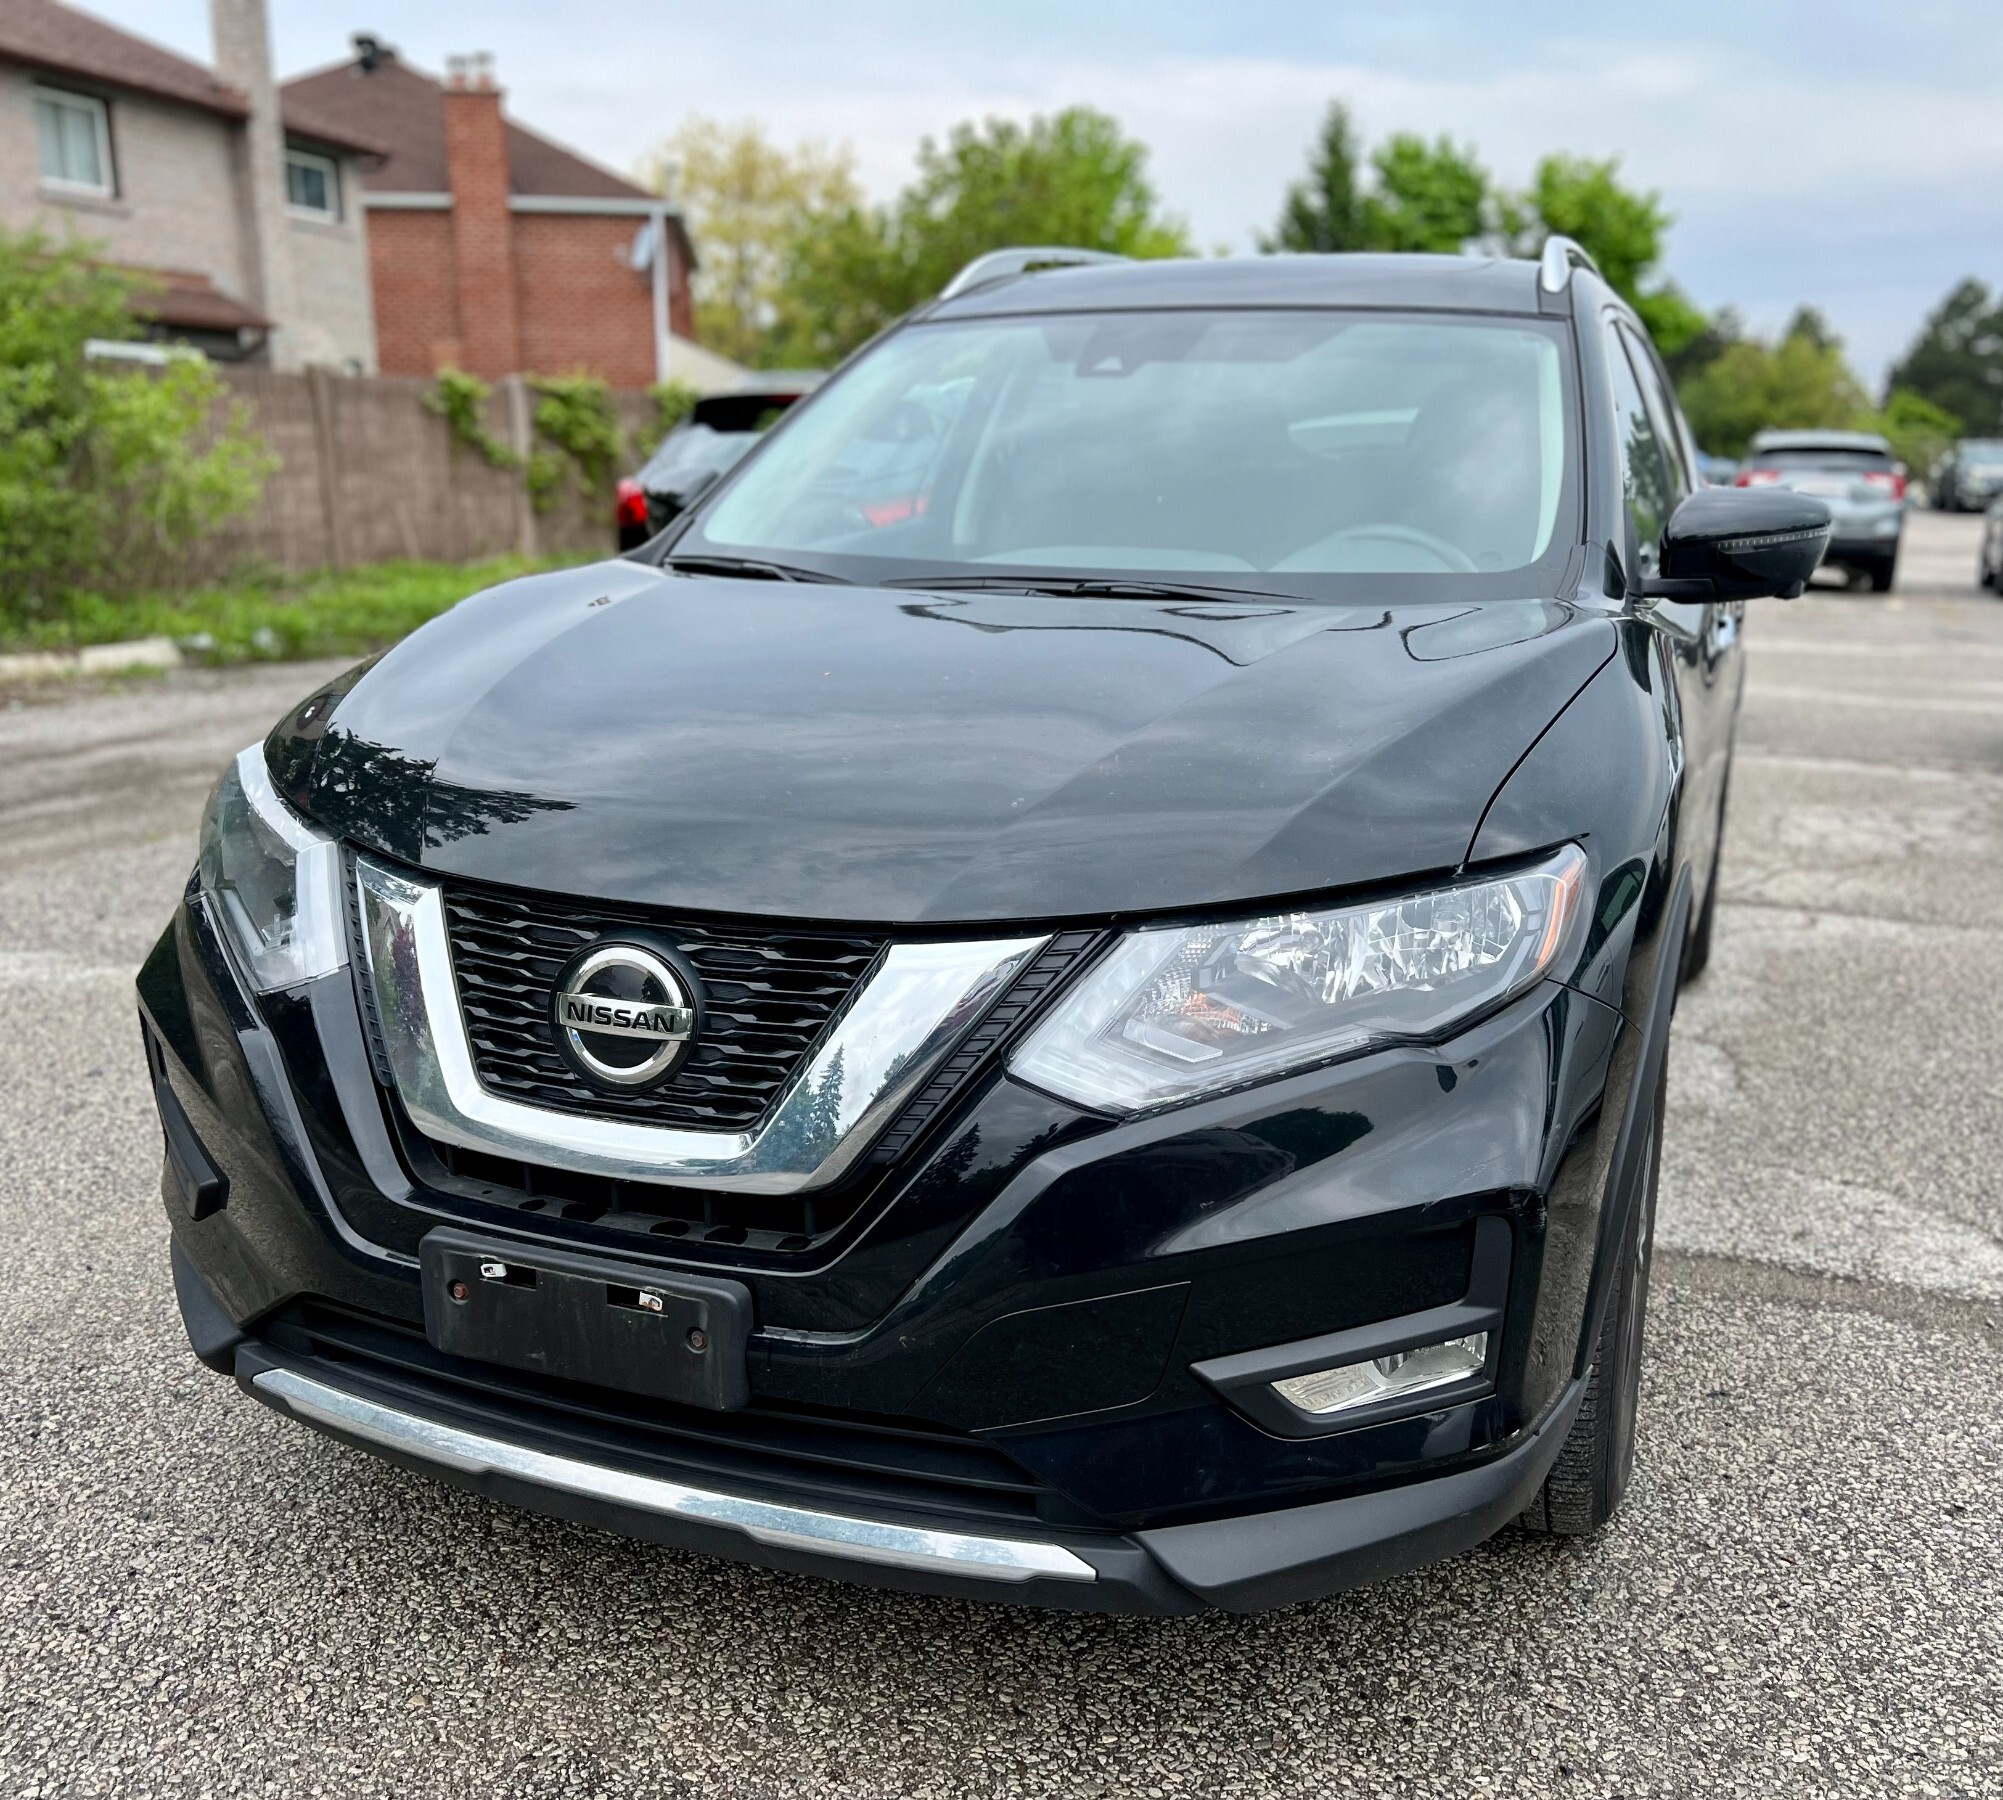 2019 Nissan Rogue SV - SORRY IM SOLD!!!